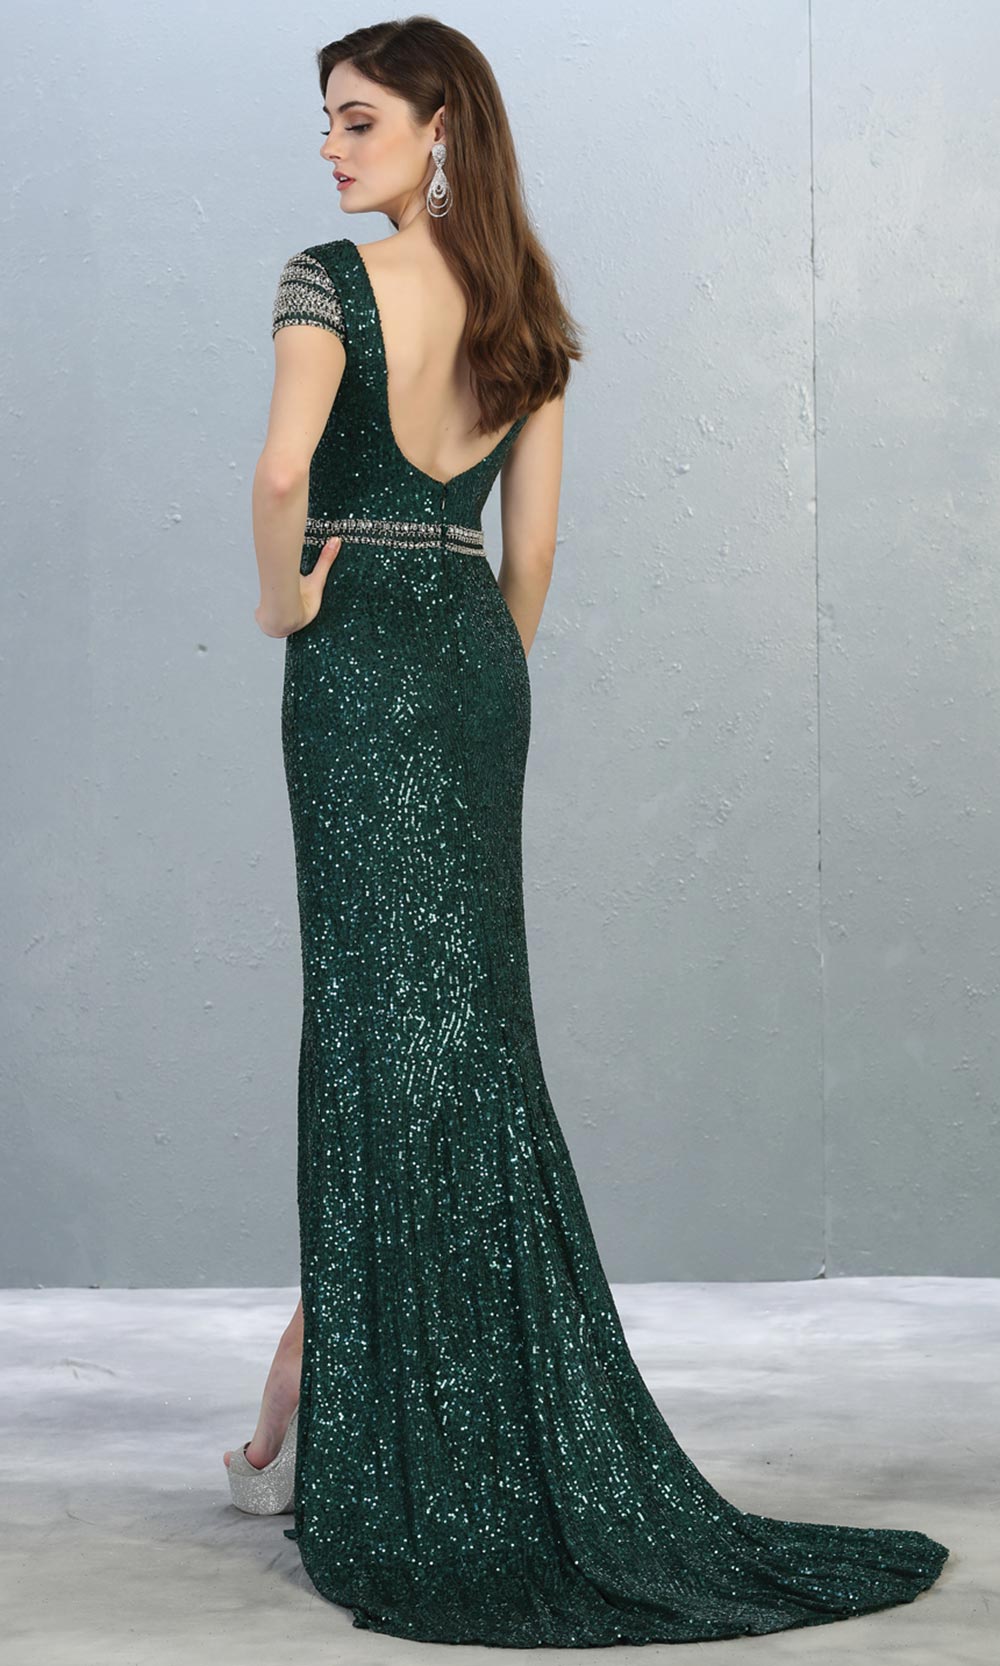 Mayqueen RQ7848 long hunter green sequin high neck evening gown w/short sleeves & slit. Full length flowy gown is perfect for  enagagement/e-shoot dress, formal wedding guest, evening party dress,prom, engagement, wedding reception. Plus sizes avail-b.jpg